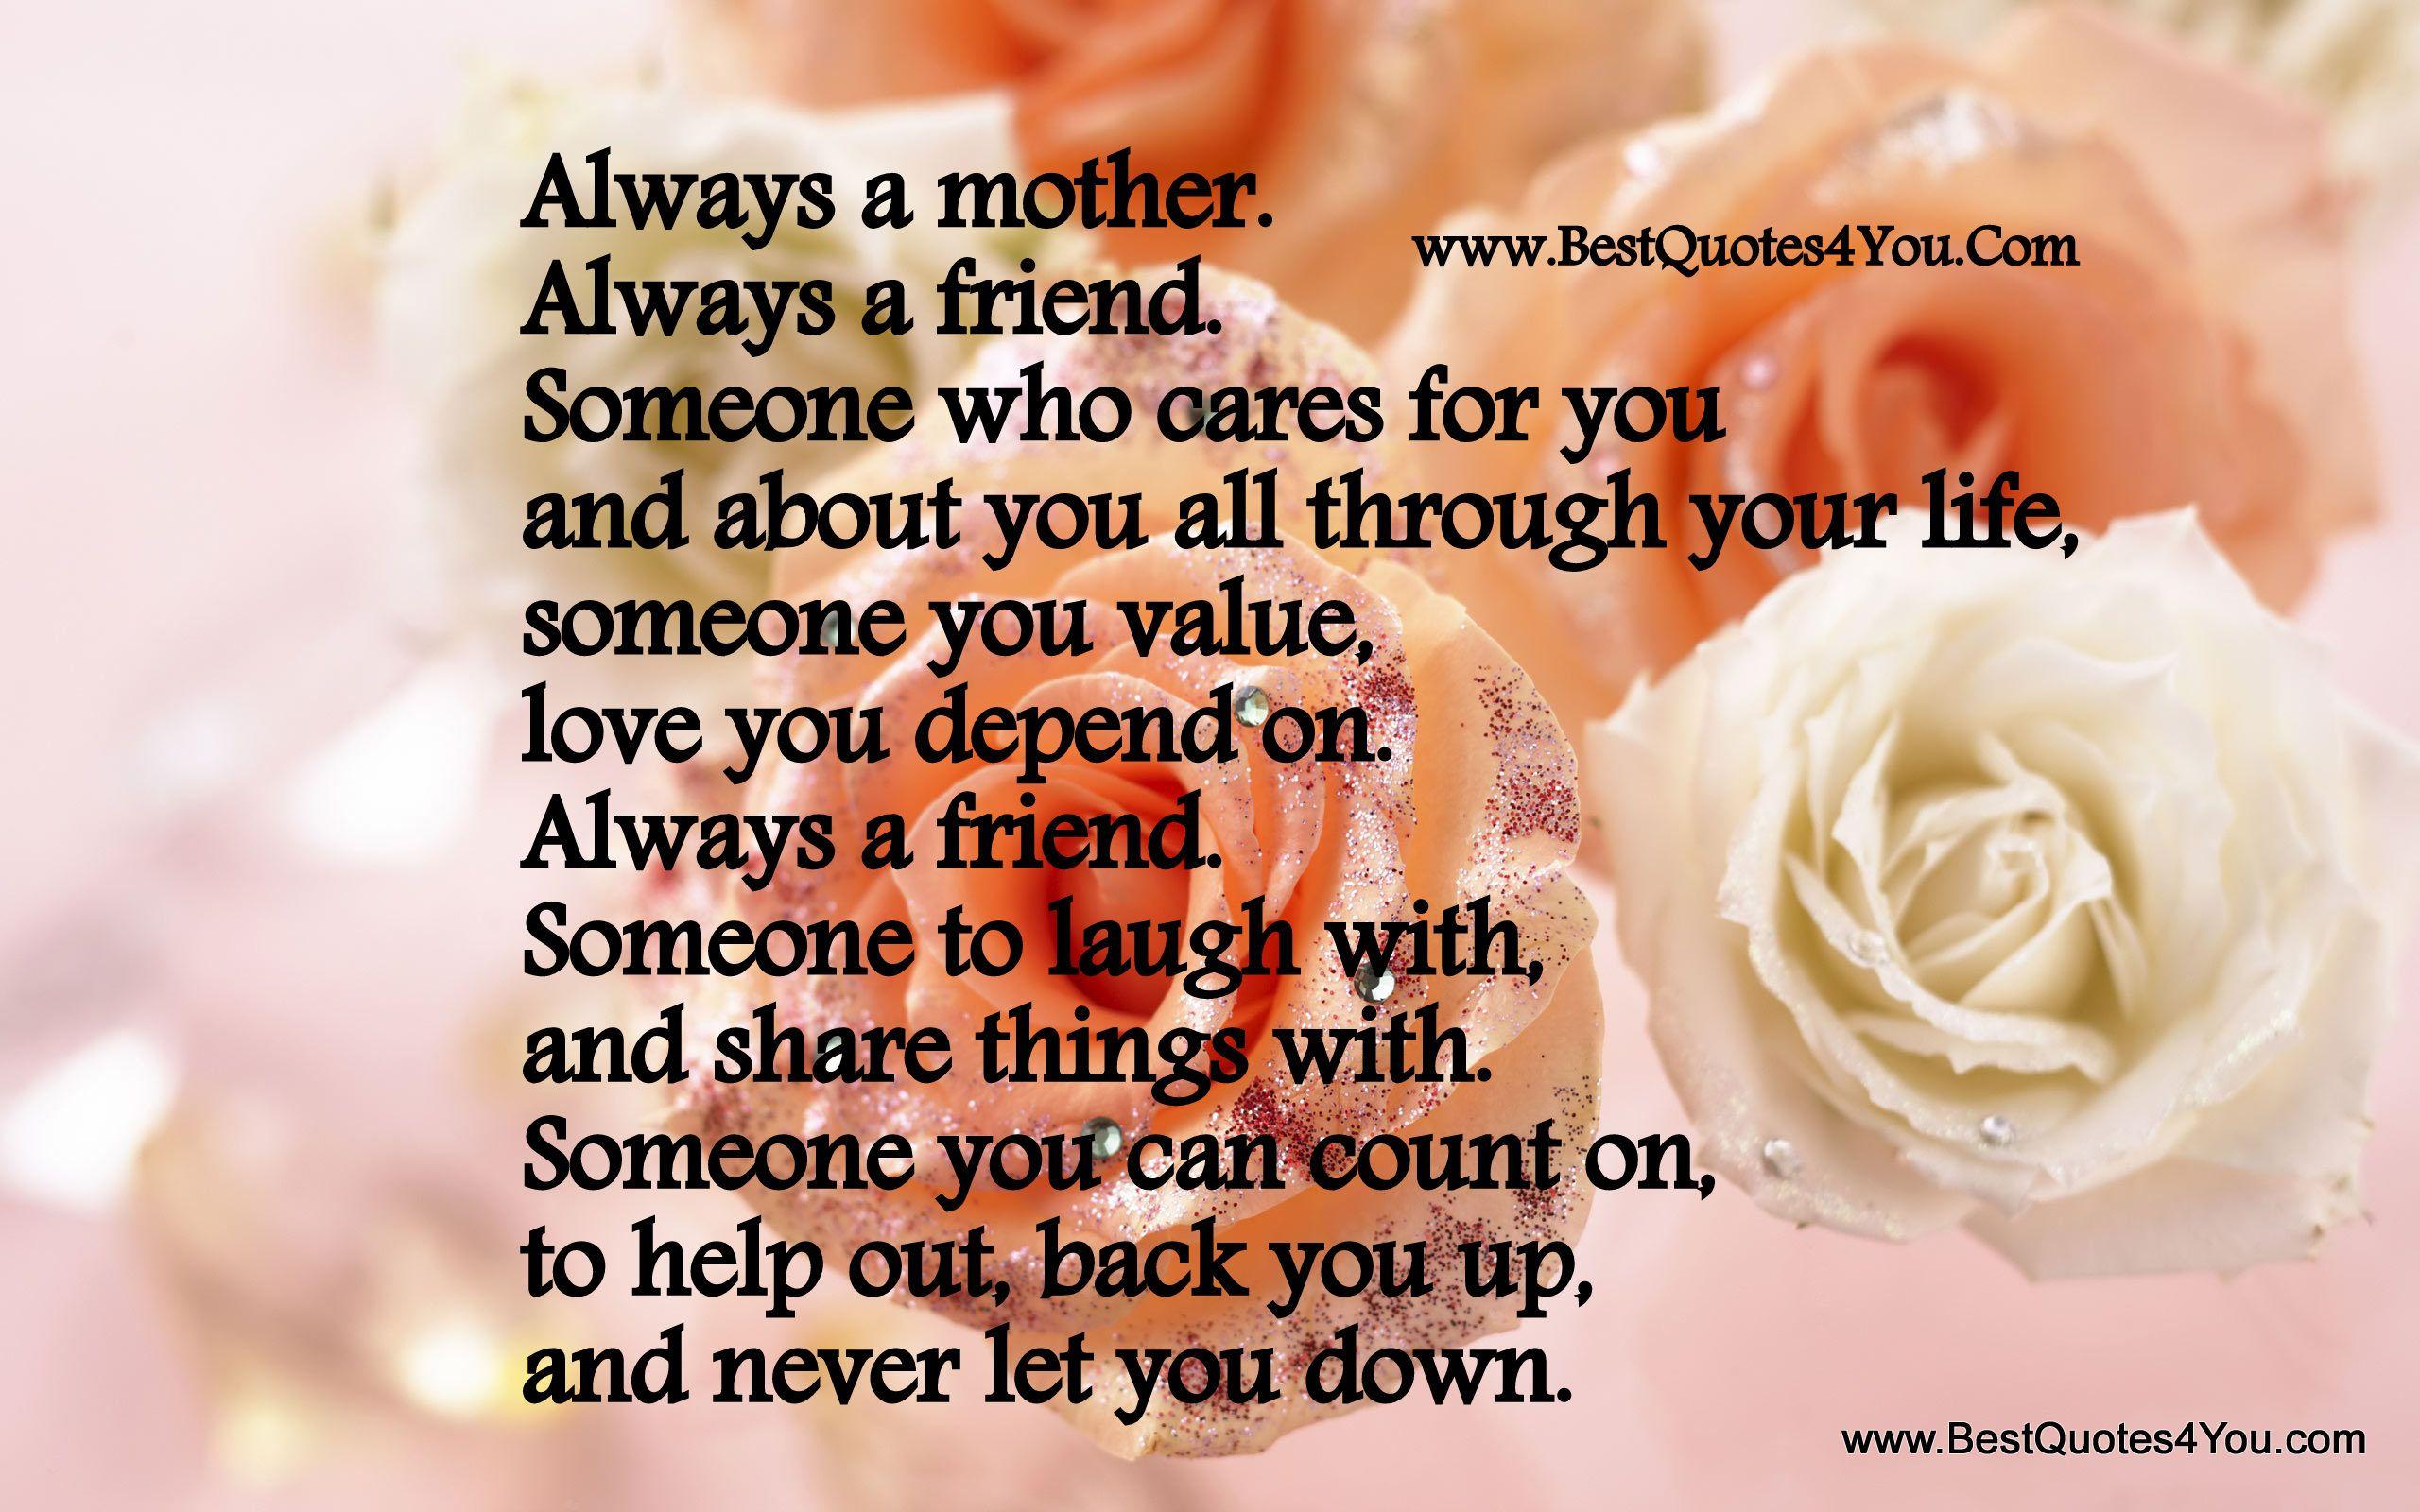 Always a mother. Always a friend. Someone who cares